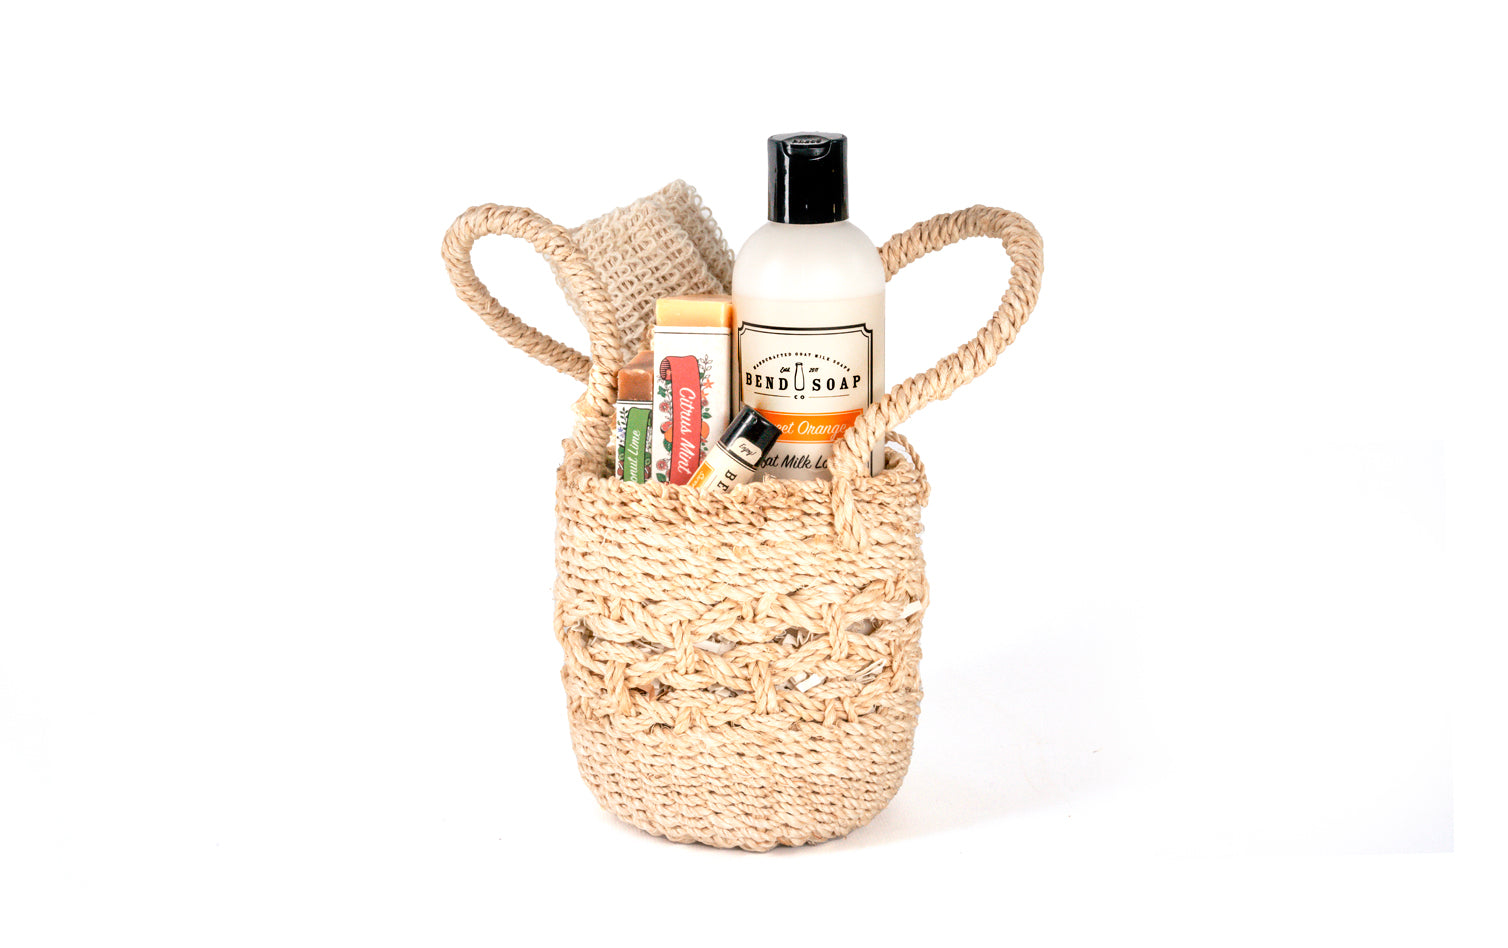 Assorted Goat Milk Soap Products in a Woven Basket